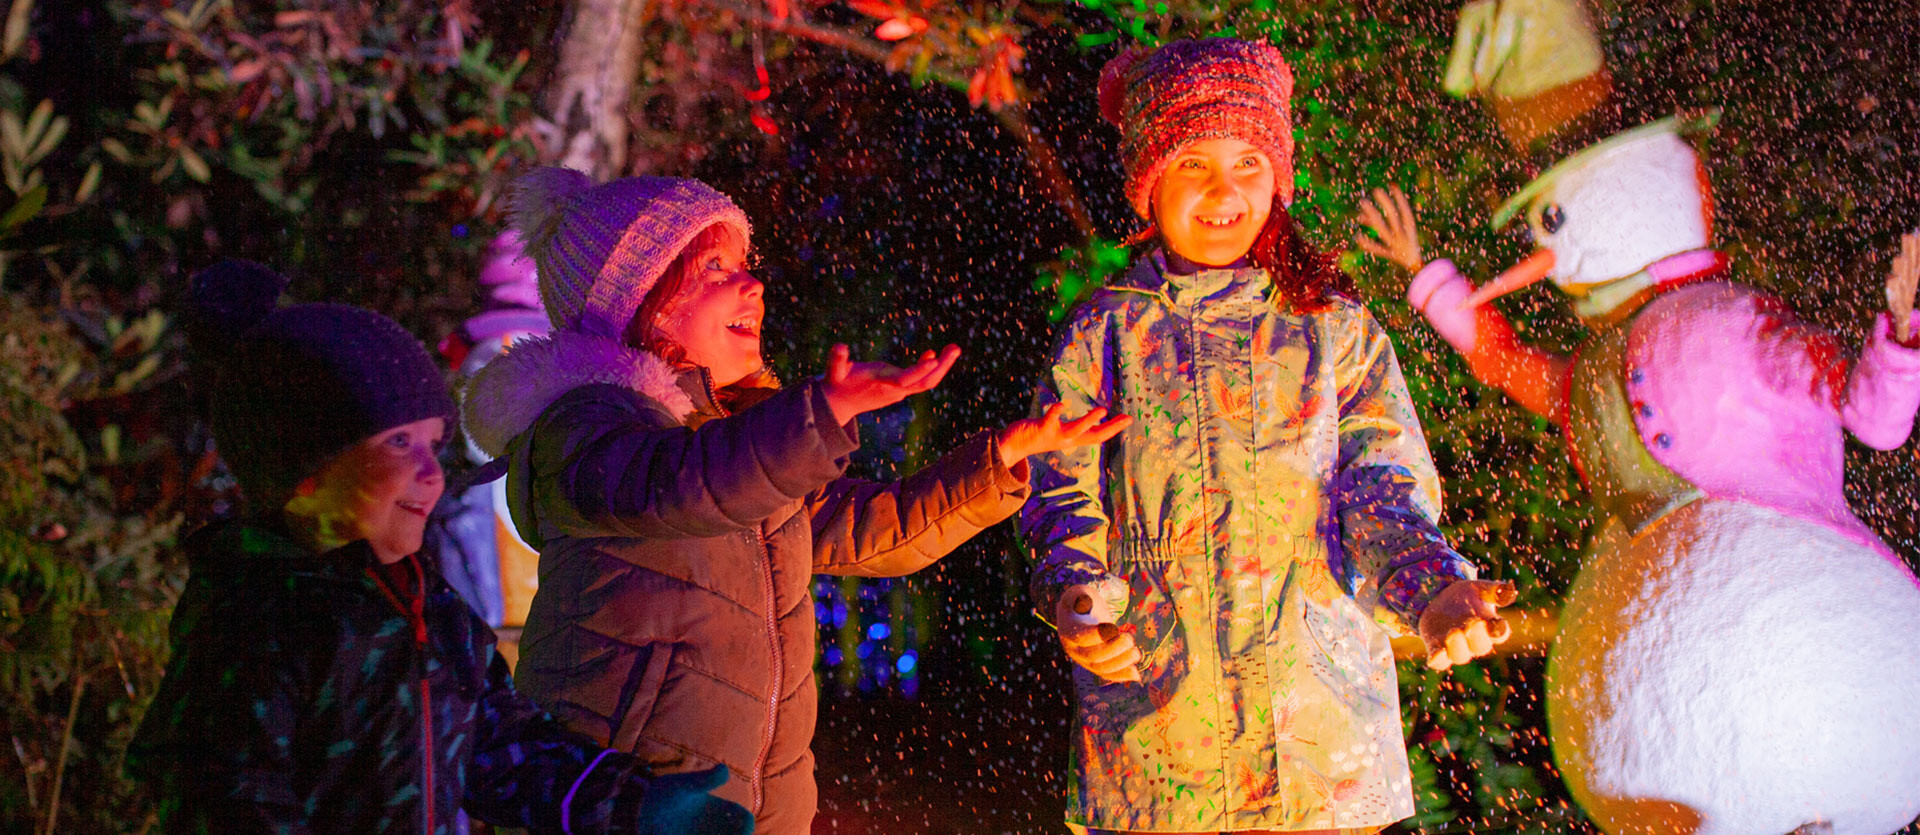 Children play in the snow during BeWILDerwood Presents Christmas